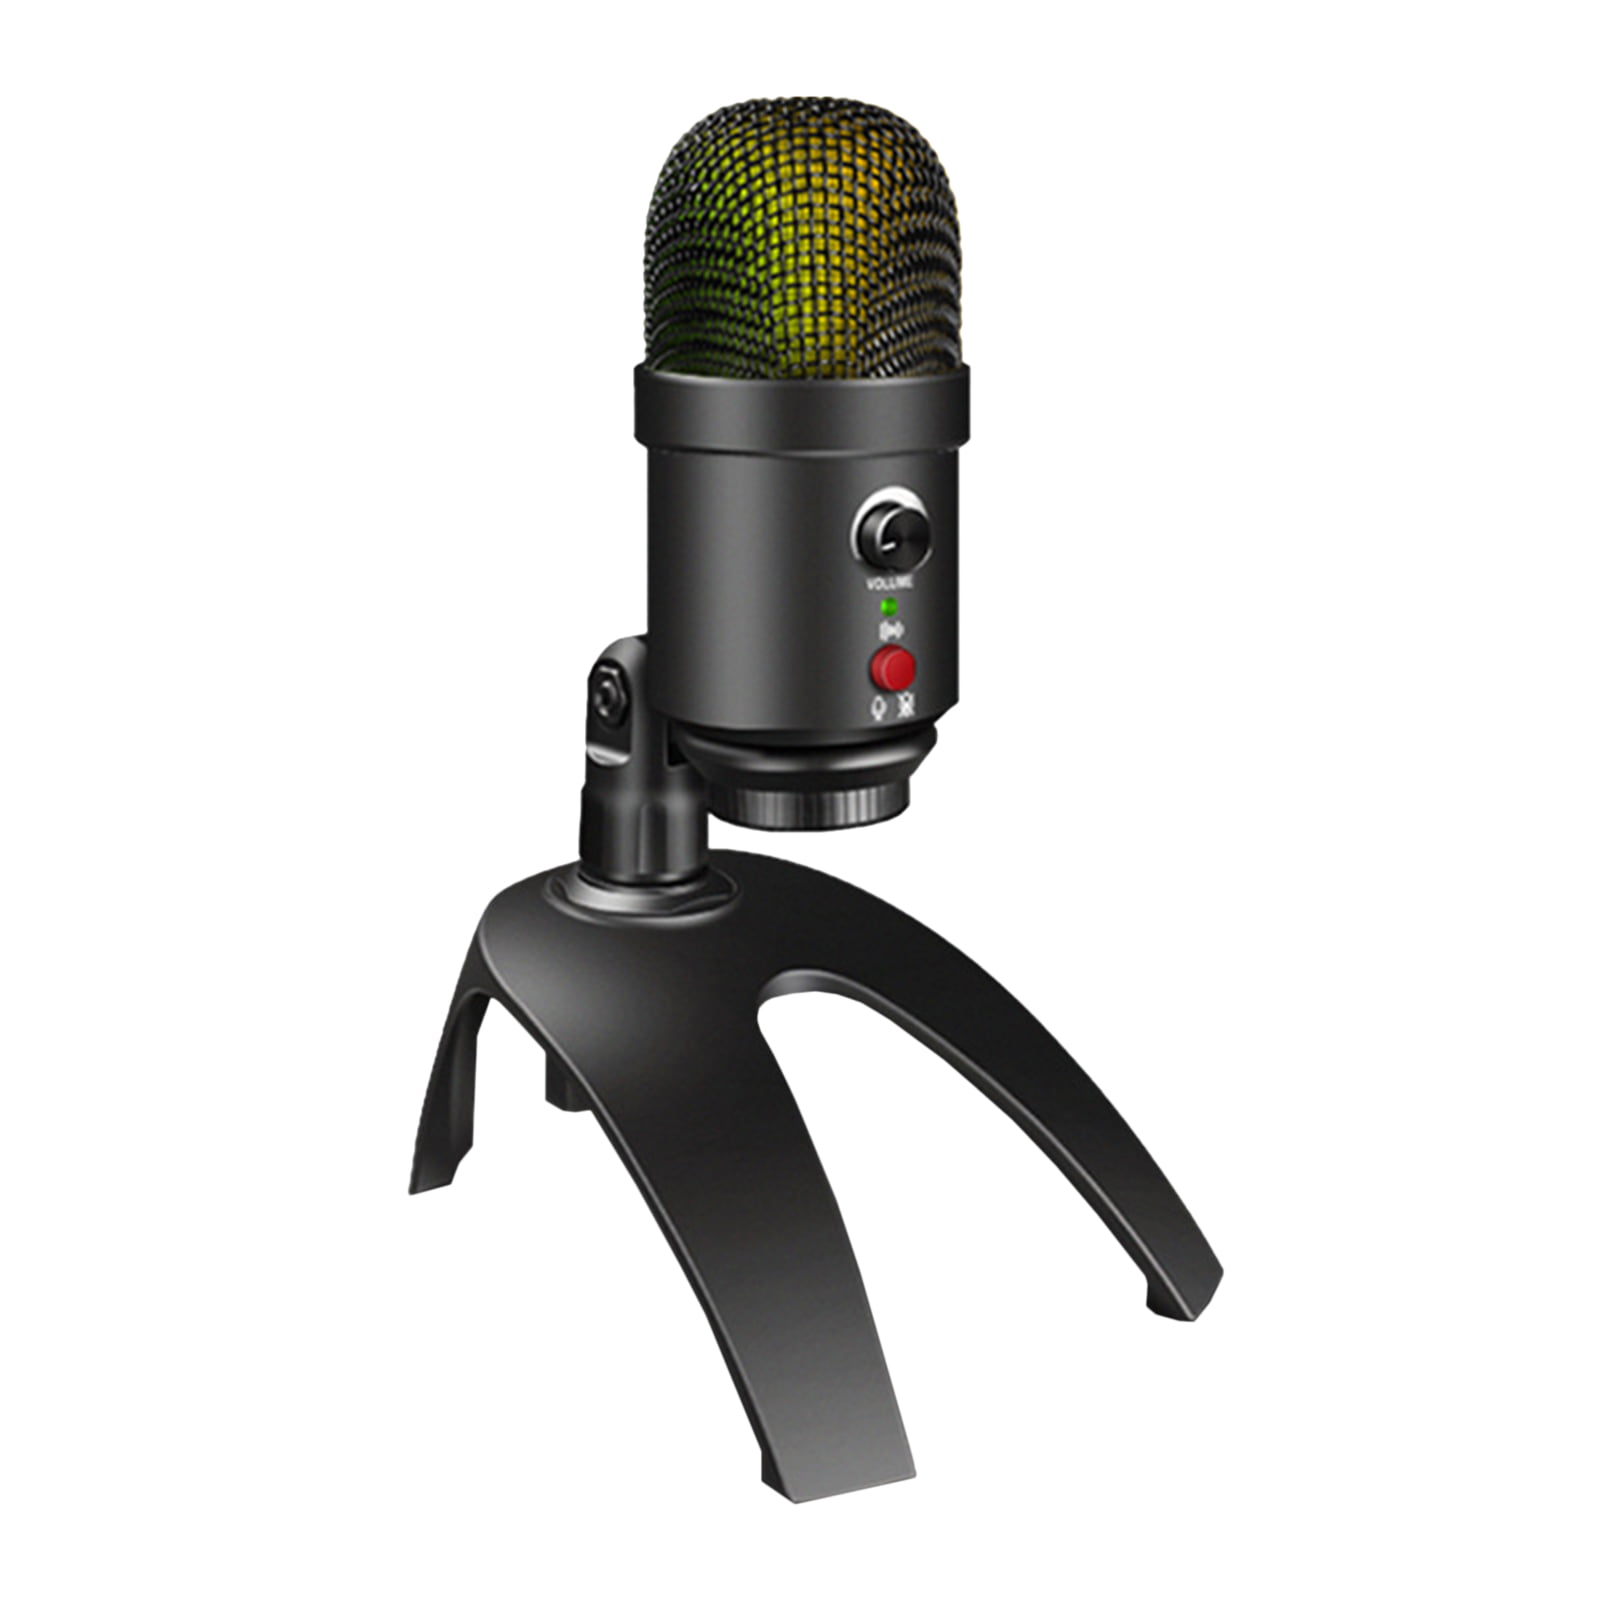 PC Microphone for Mac and Windows Computers,Optimized for Recording,Streaming Twitch,Voice Overs,Podcasting for YouTube,Skype USB Microphone Kit 192KHZ/24BIT 